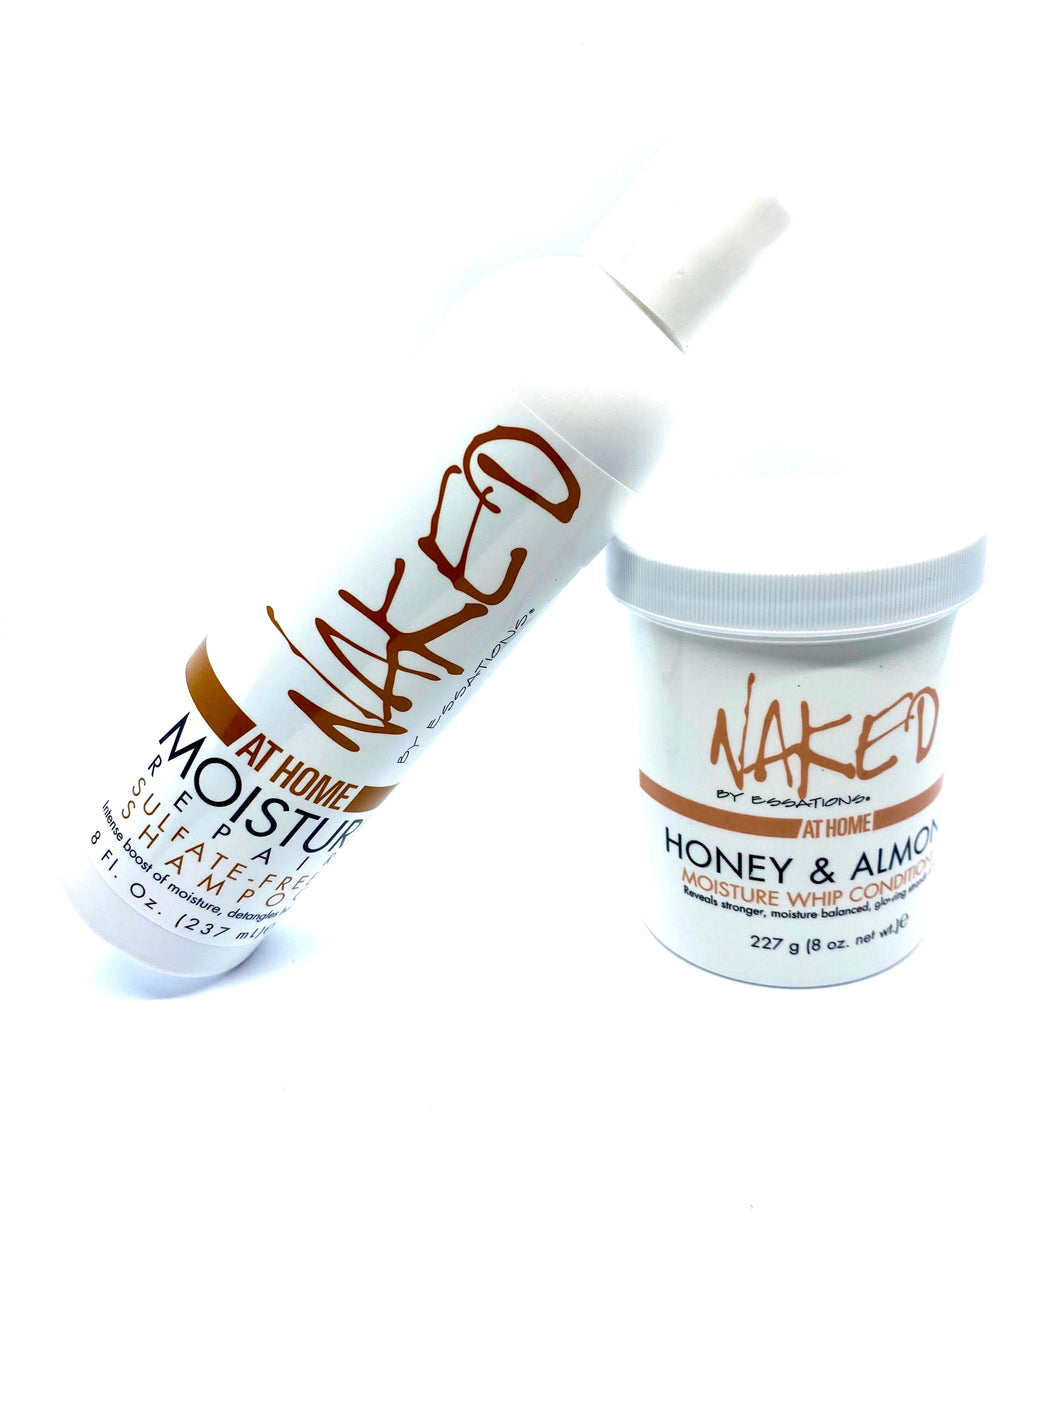 Naked by Essations Moisture Repair Shampoo and Conditioner Set!